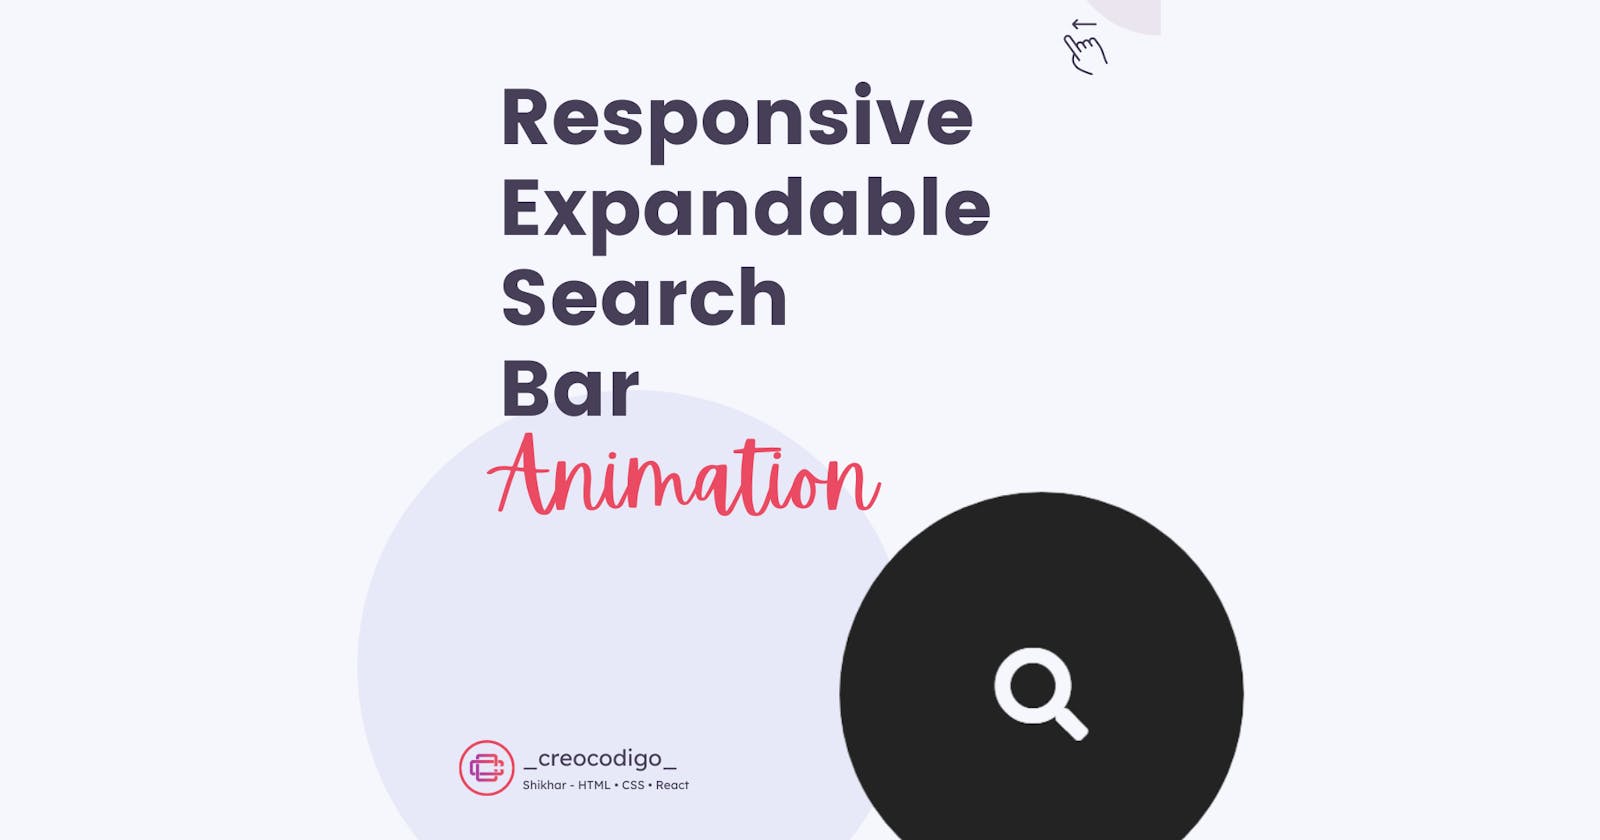 Responsive Expandable Search Bar Animation